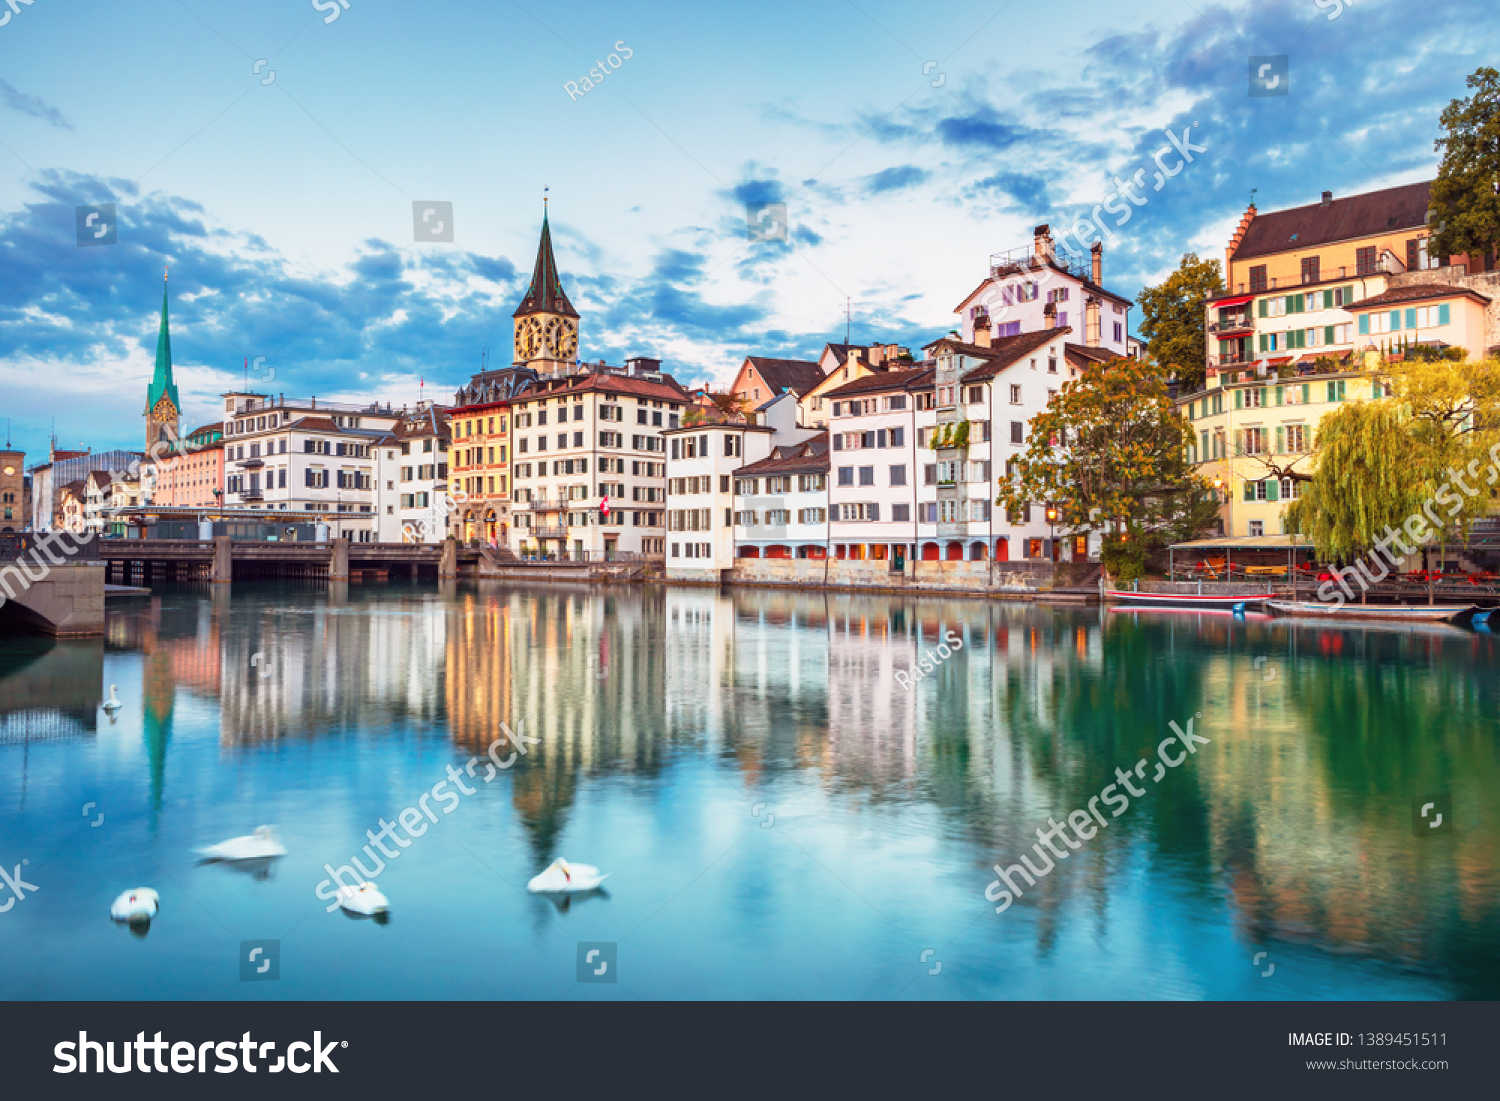 Scenic view of historic Zurich city center with famous Fraumunster and Grossmunster Churches and river Limmat at Lake Zurich, Canton of Zurich, Switzerland #1389451511